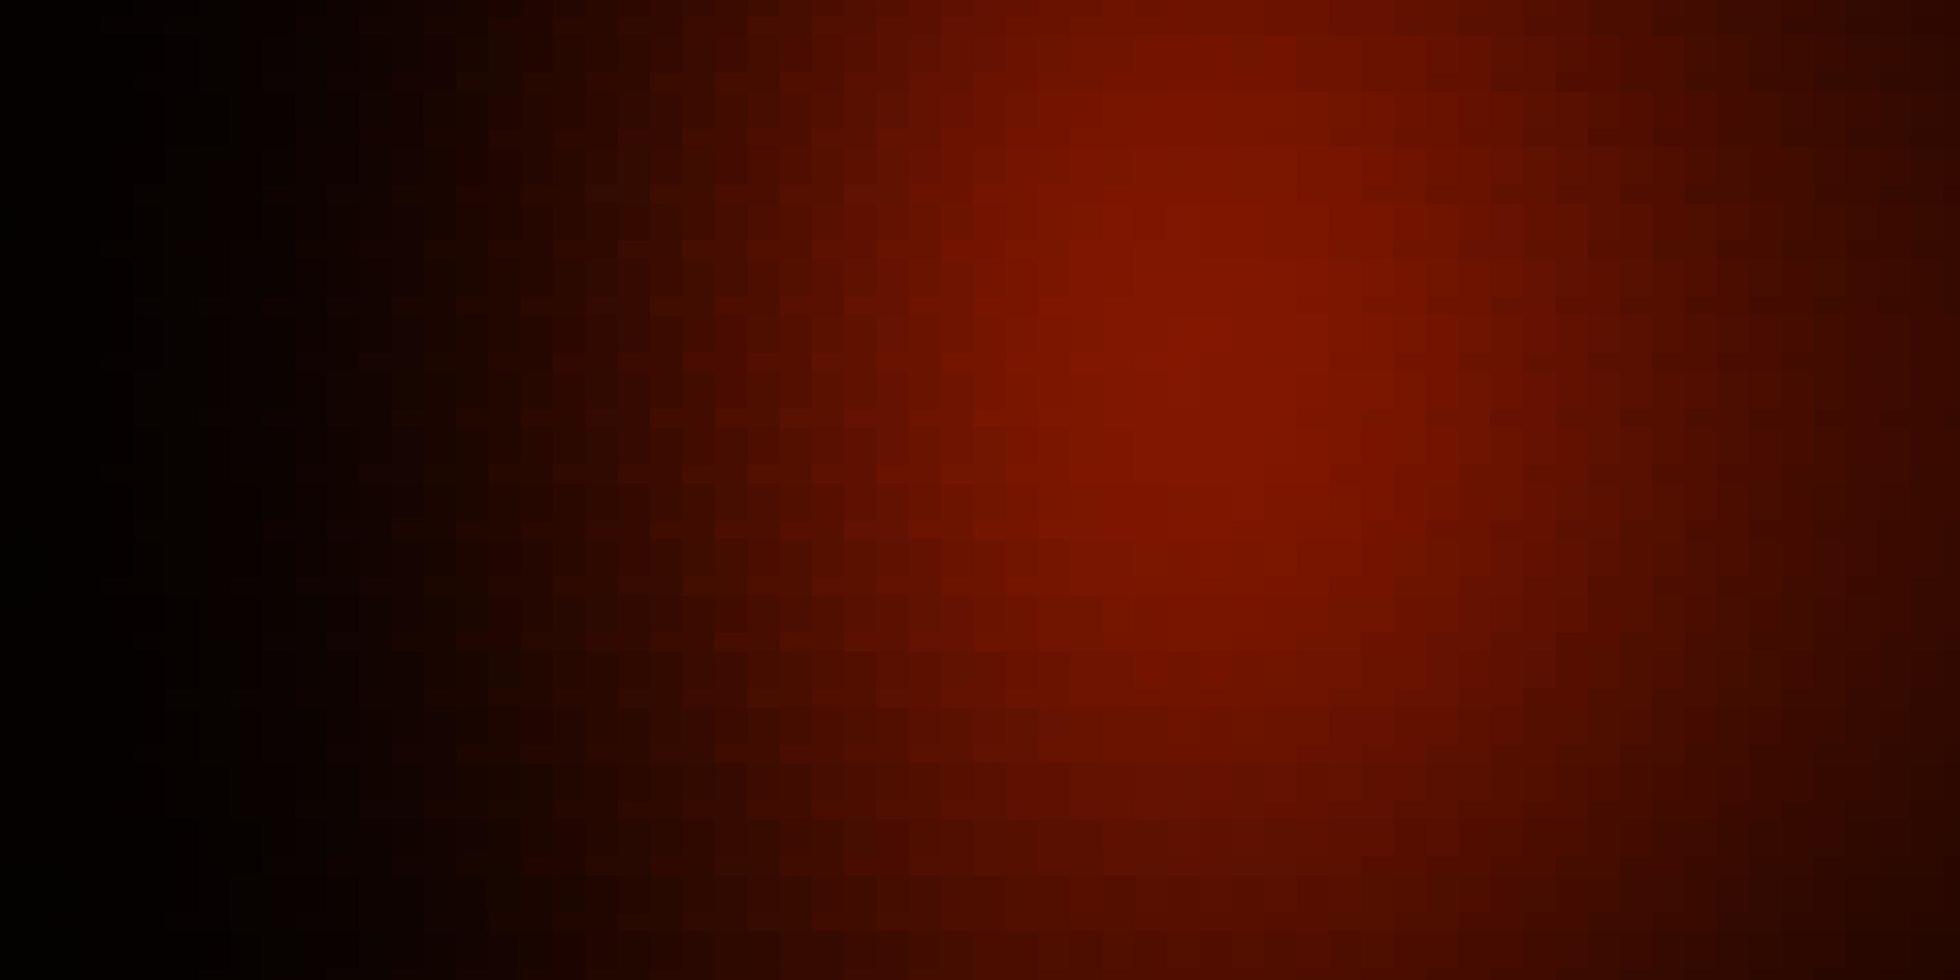 Light Brown vector background with rectangles.